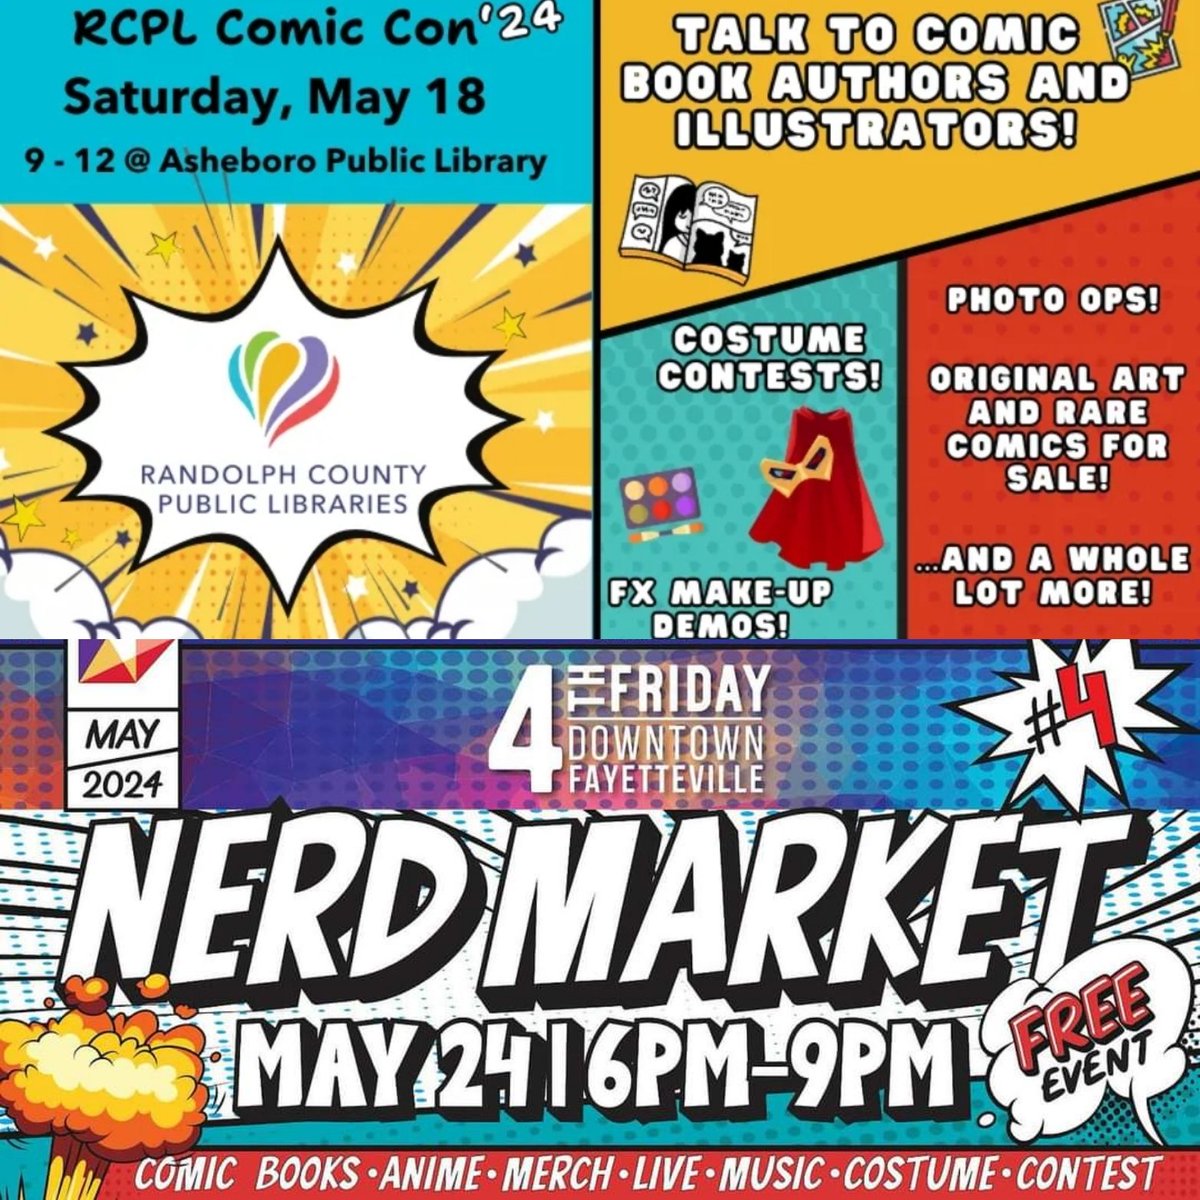 Two quick events coming up for Faith & Fandom in May! Randolph County Public Libraries Comic Con in Asheboro, NC on the 18th, and Nerd Market in Downtown Fayetteville, NC on the 24th!